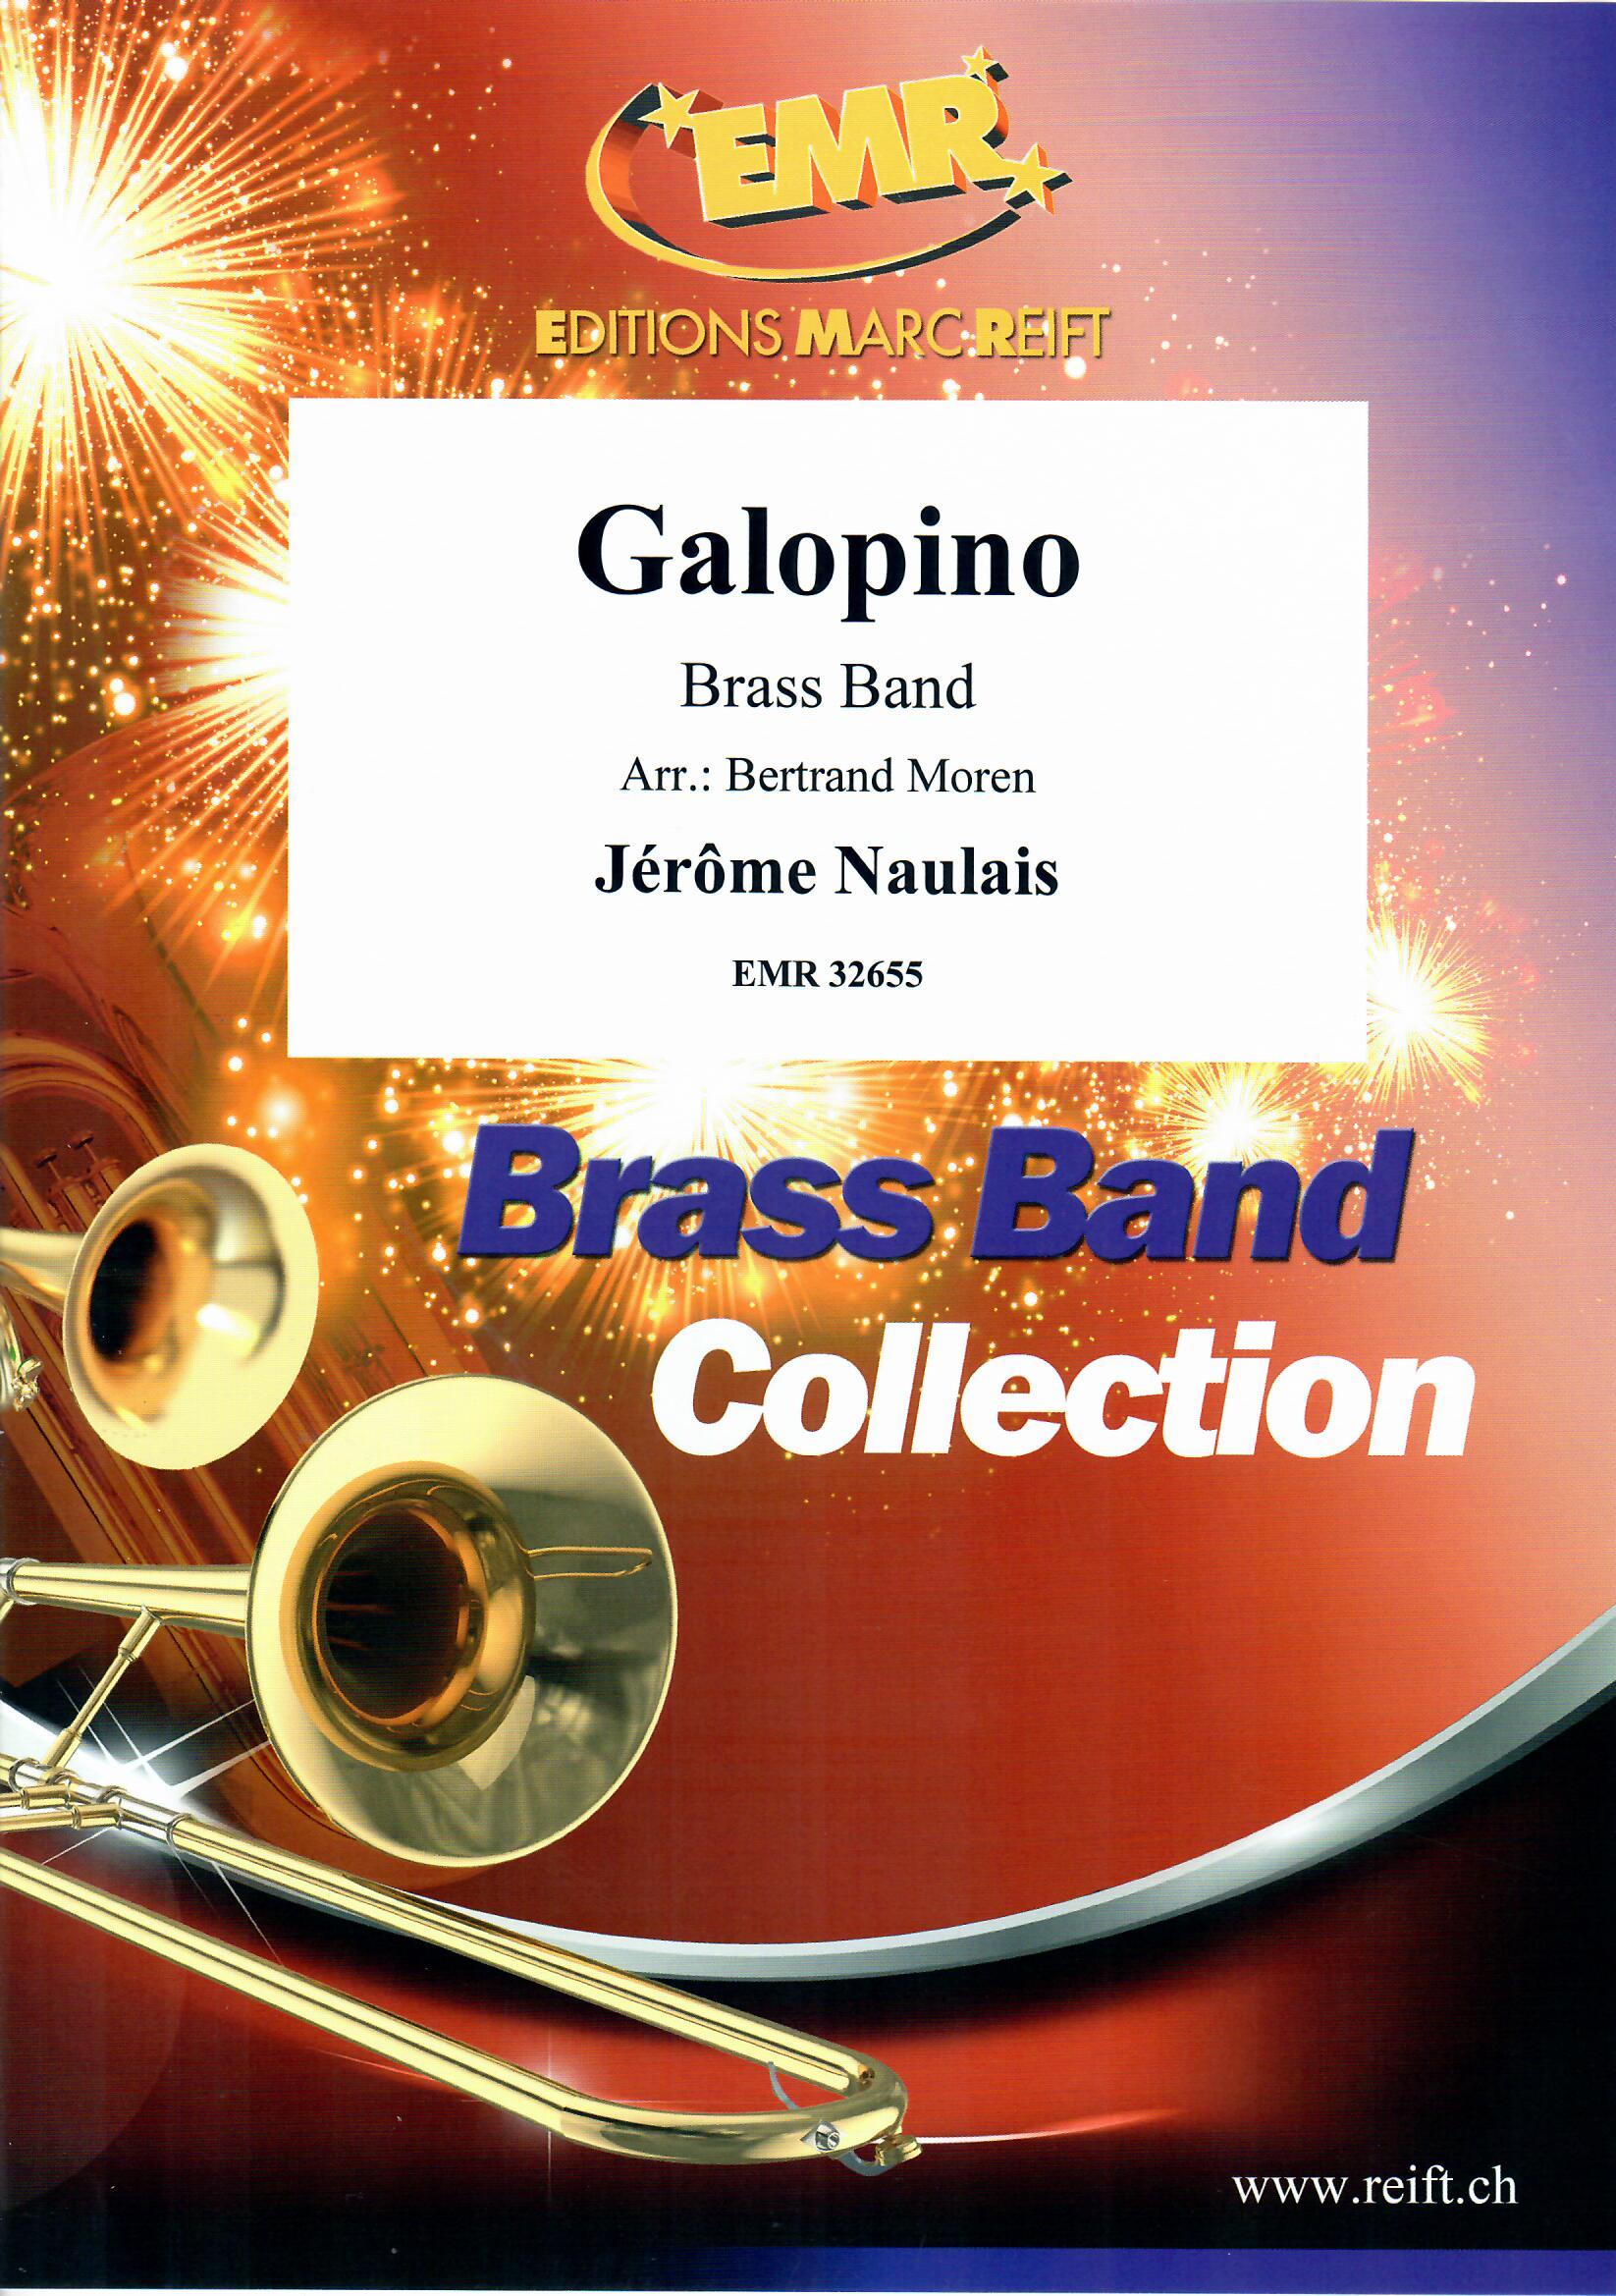 GALOPINO - Parts & Score, NEW & RECENT Publications, LIGHT CONCERT MUSIC